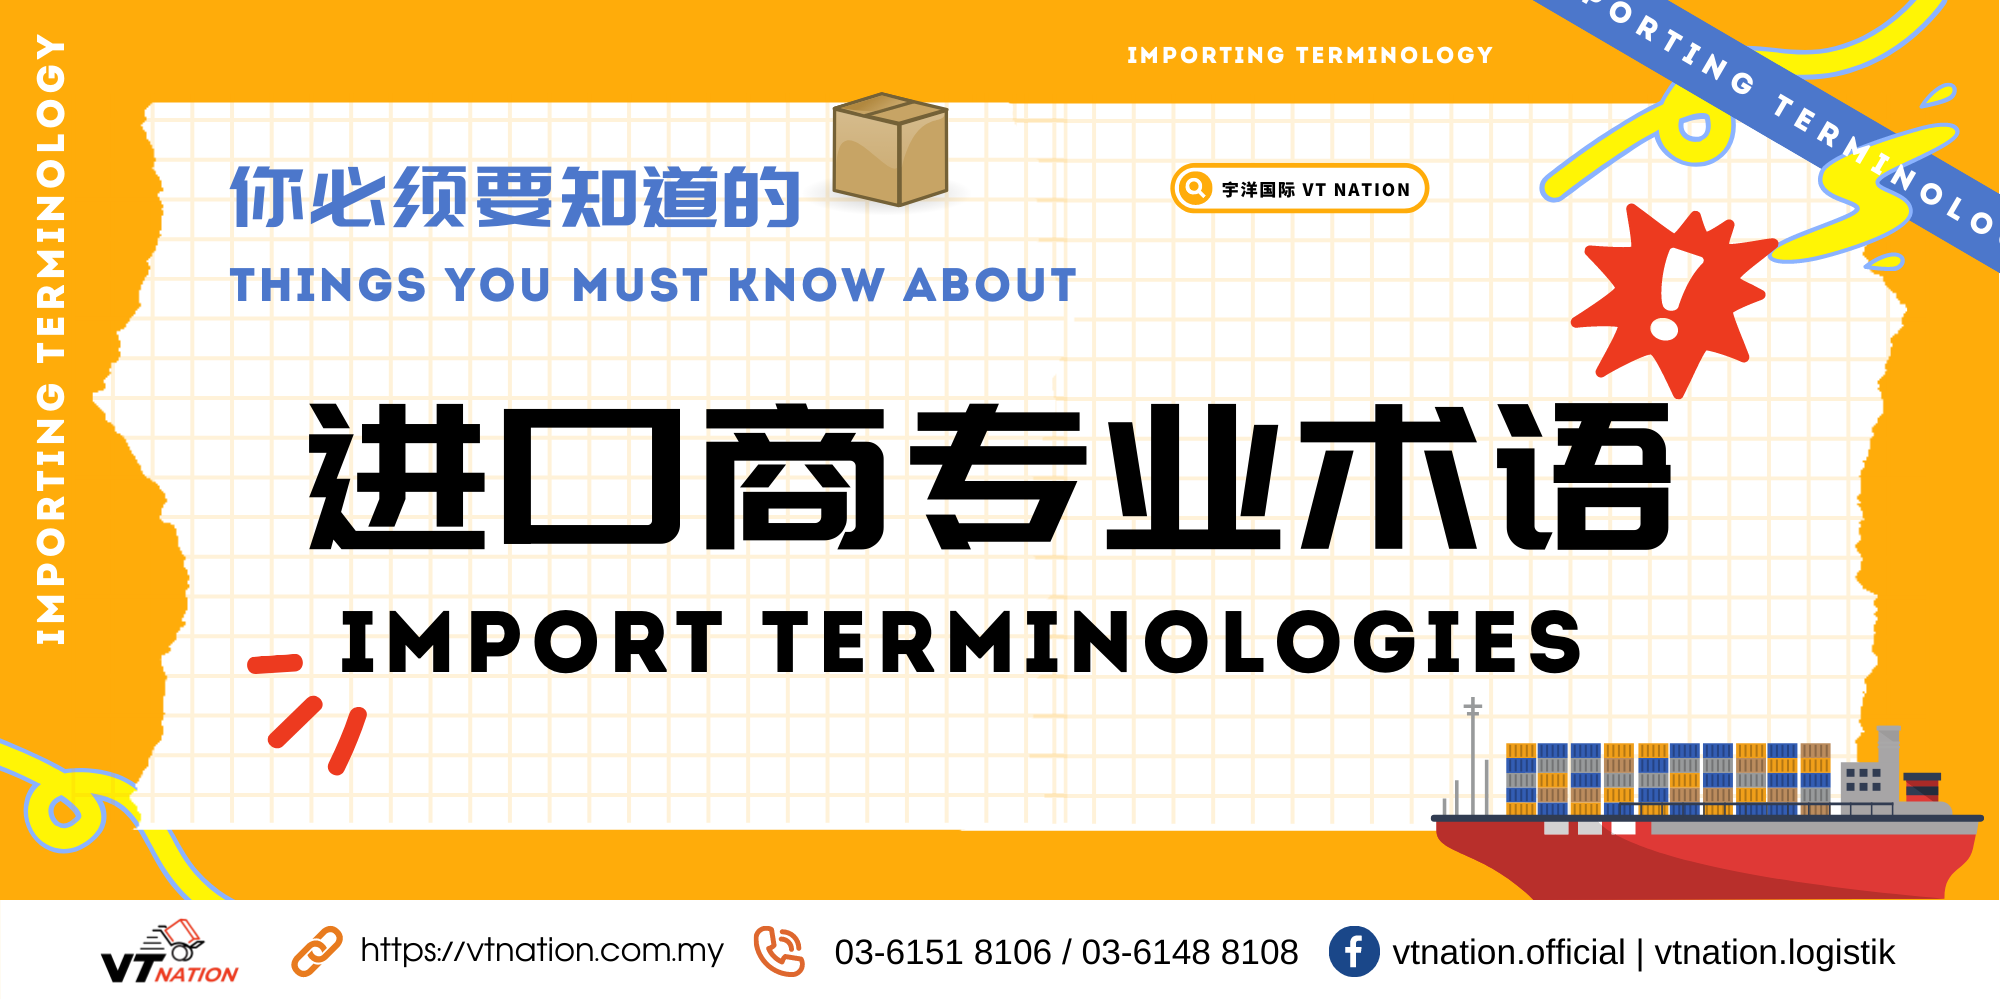 The Importer terminology you must know